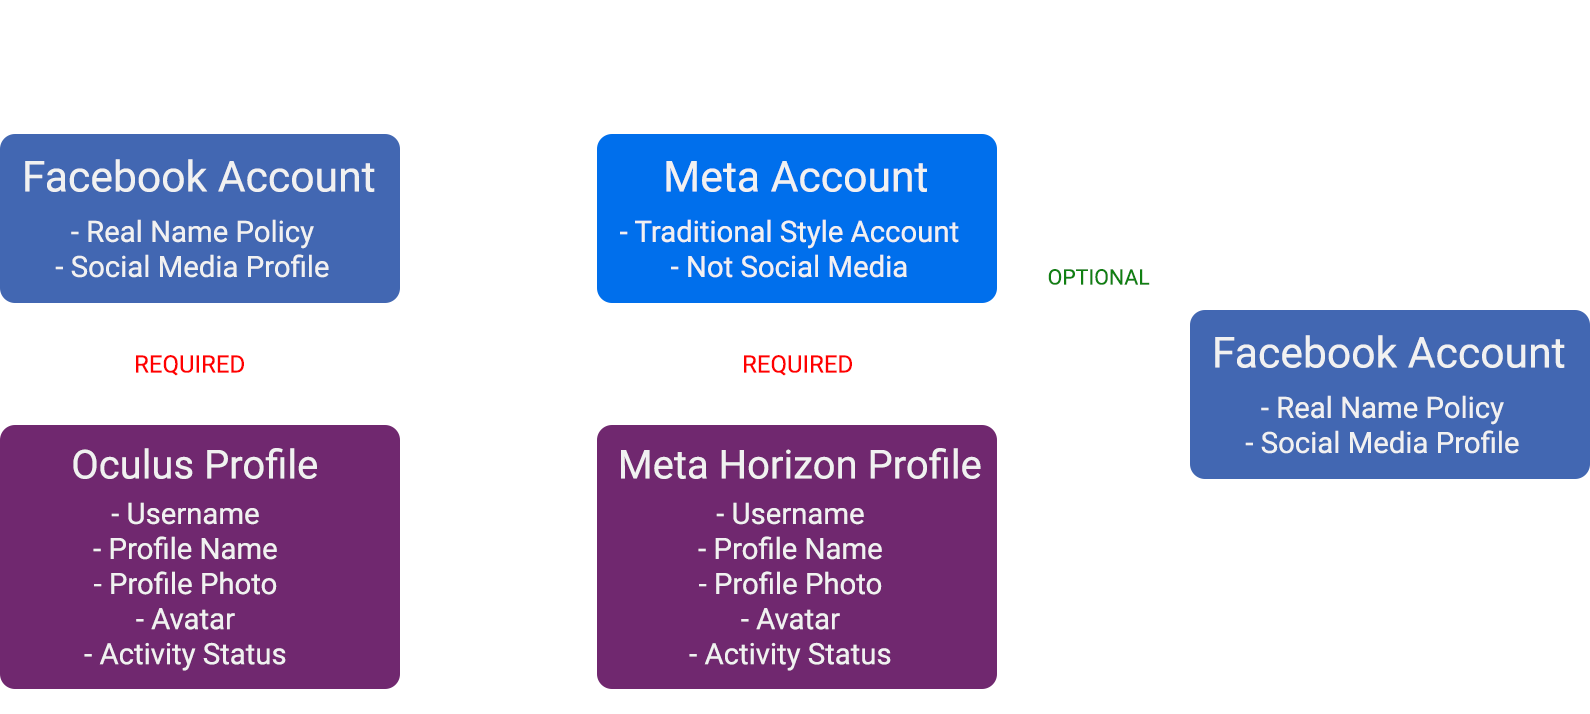 Meta to Remove Facebook Requirement for Quest 2 Starting Next Month